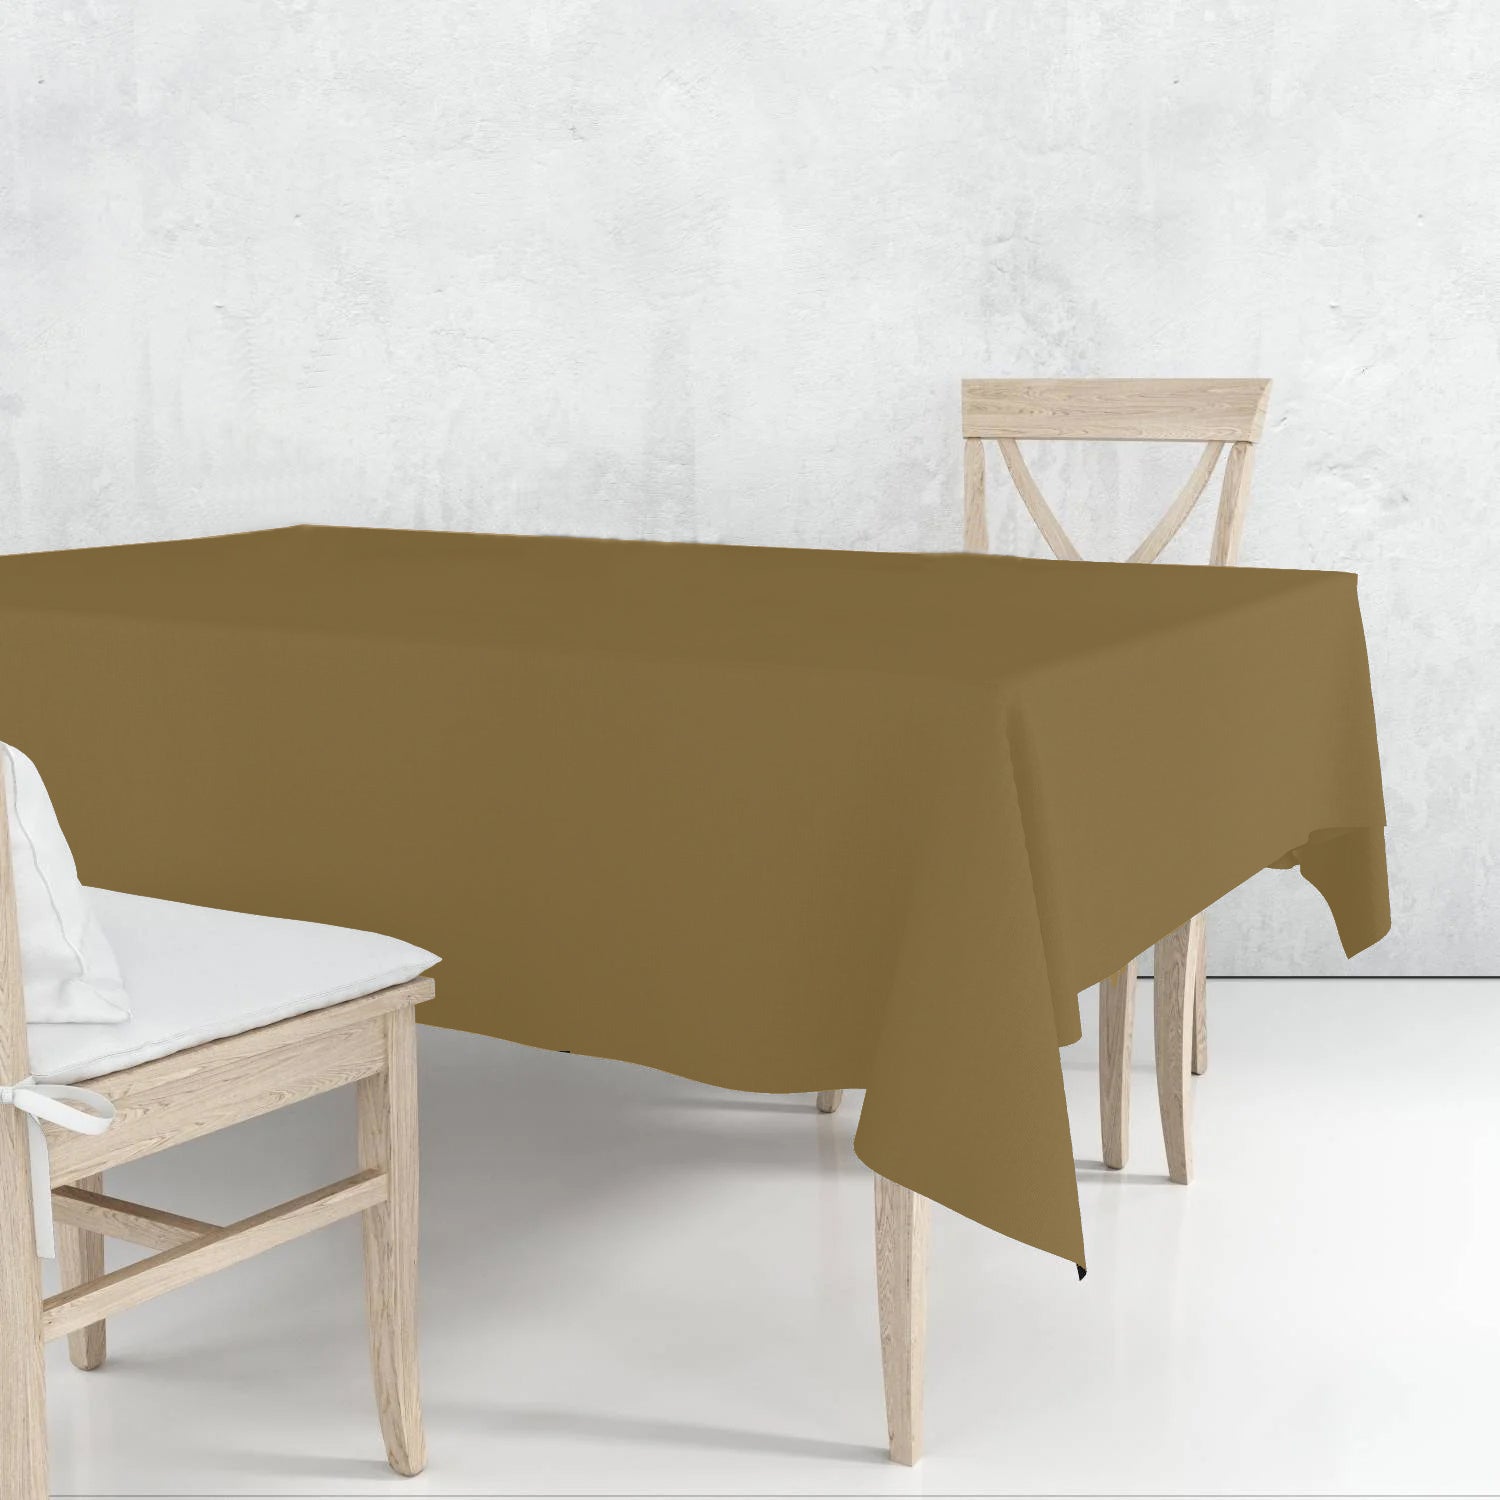 Disposable Plastic Premium Tablecloth Heavyweight Rectangle Gold 54" x 108" Tablesettings Nicole Fantini Collection   